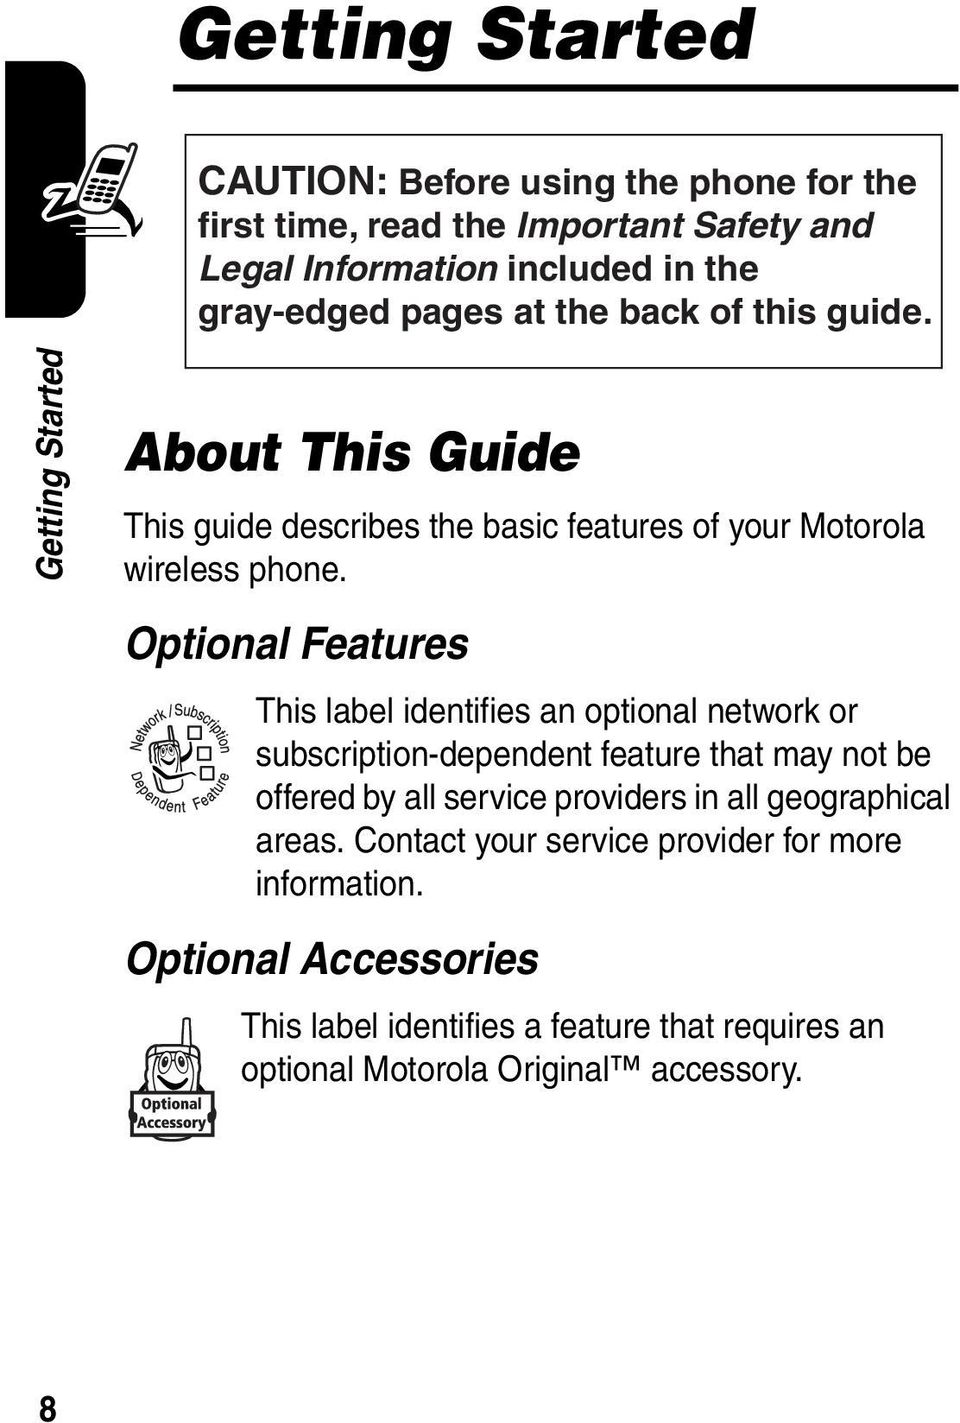 Optional Features 032380o This label identifies an optional network or subscription-dependent feature that may not be offered by all service providers in all